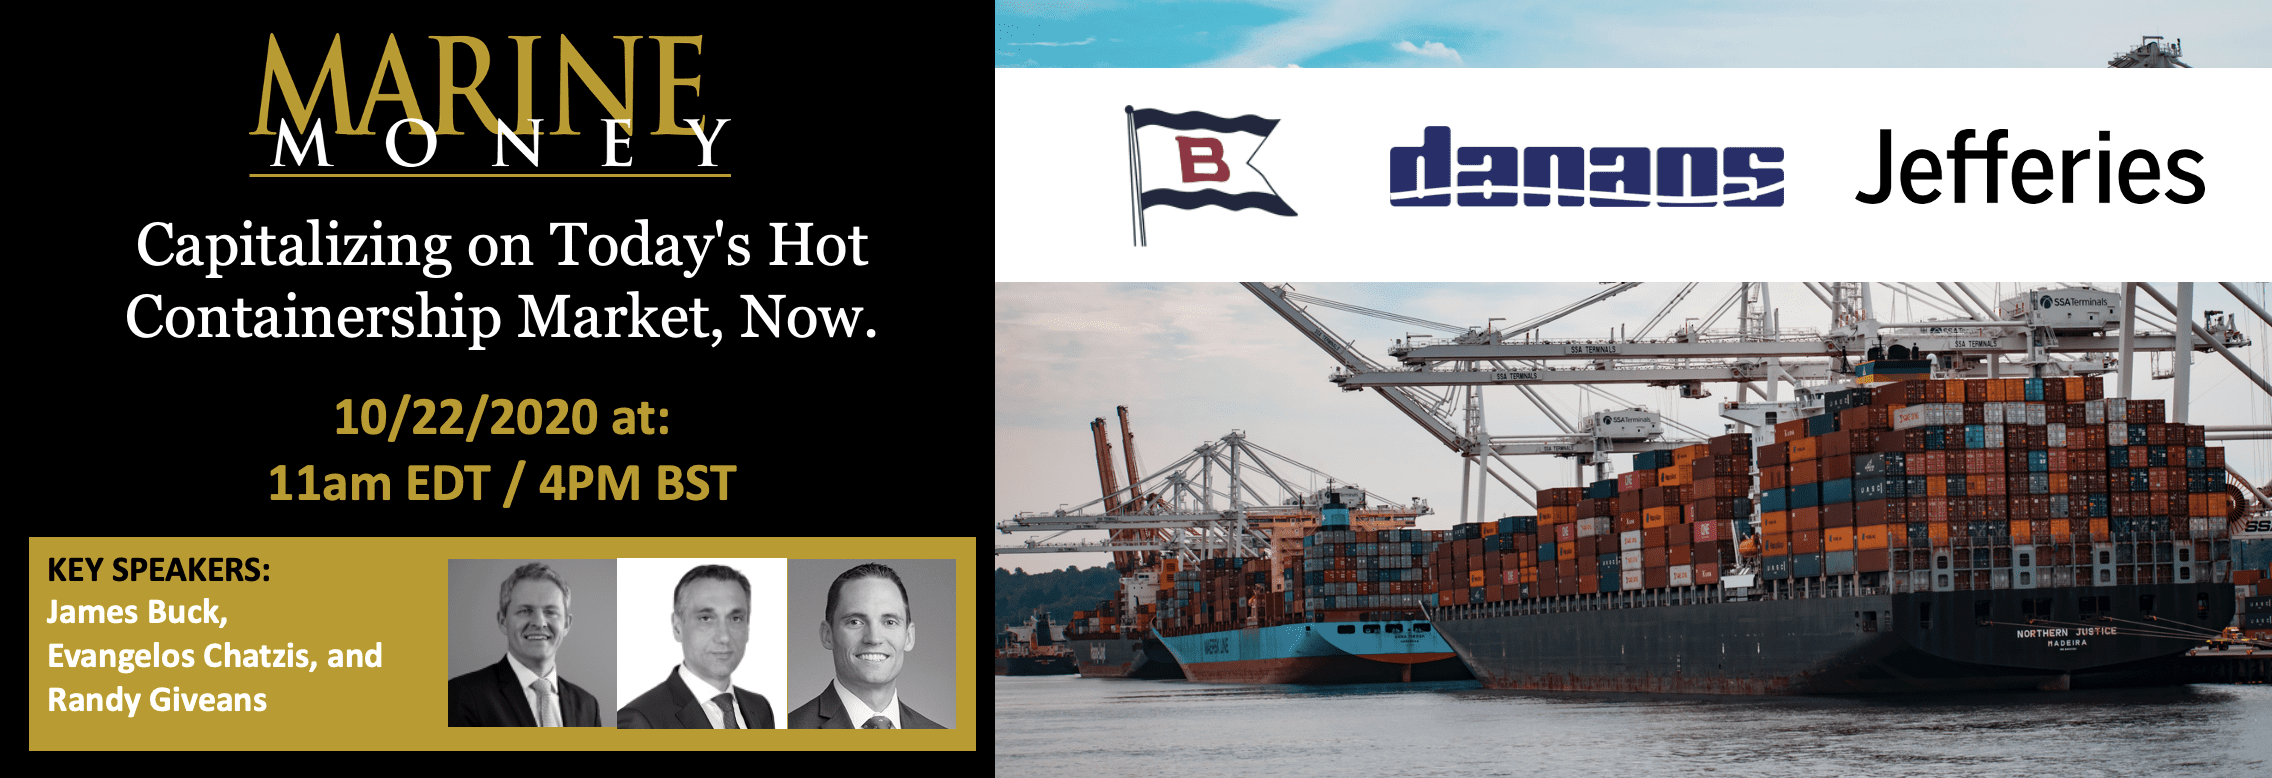 25-Minute Investment Opportunity Speed Round: Capitalizing on Today’s Hot Containership Market Now